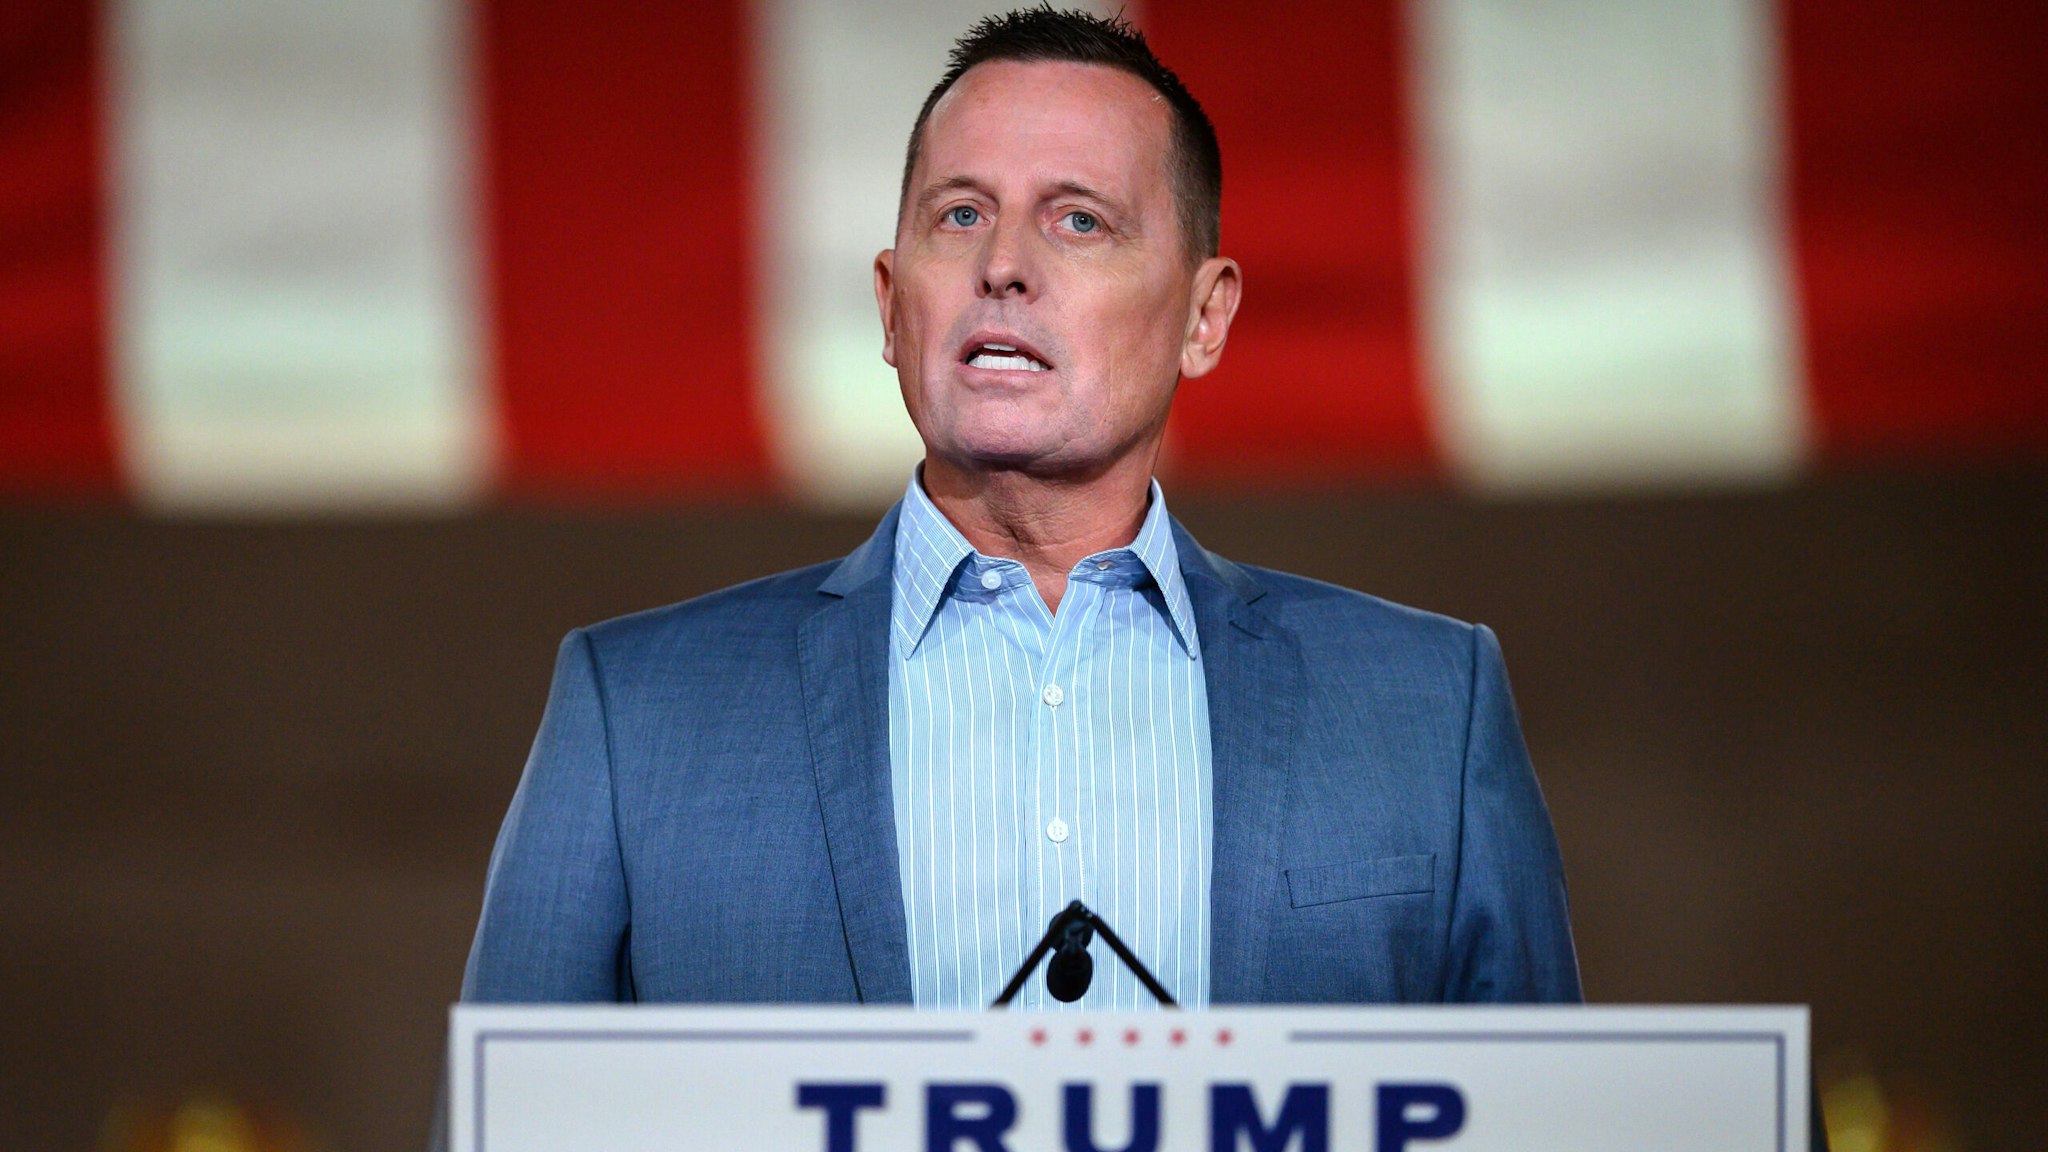 Former US ambassador to Germany, Richard Grenell, addresses the Republican National Convention in a pre-recorded speech at the Andrew W. Mellon Auditorium in Washington, DC, on August 26, 2020.